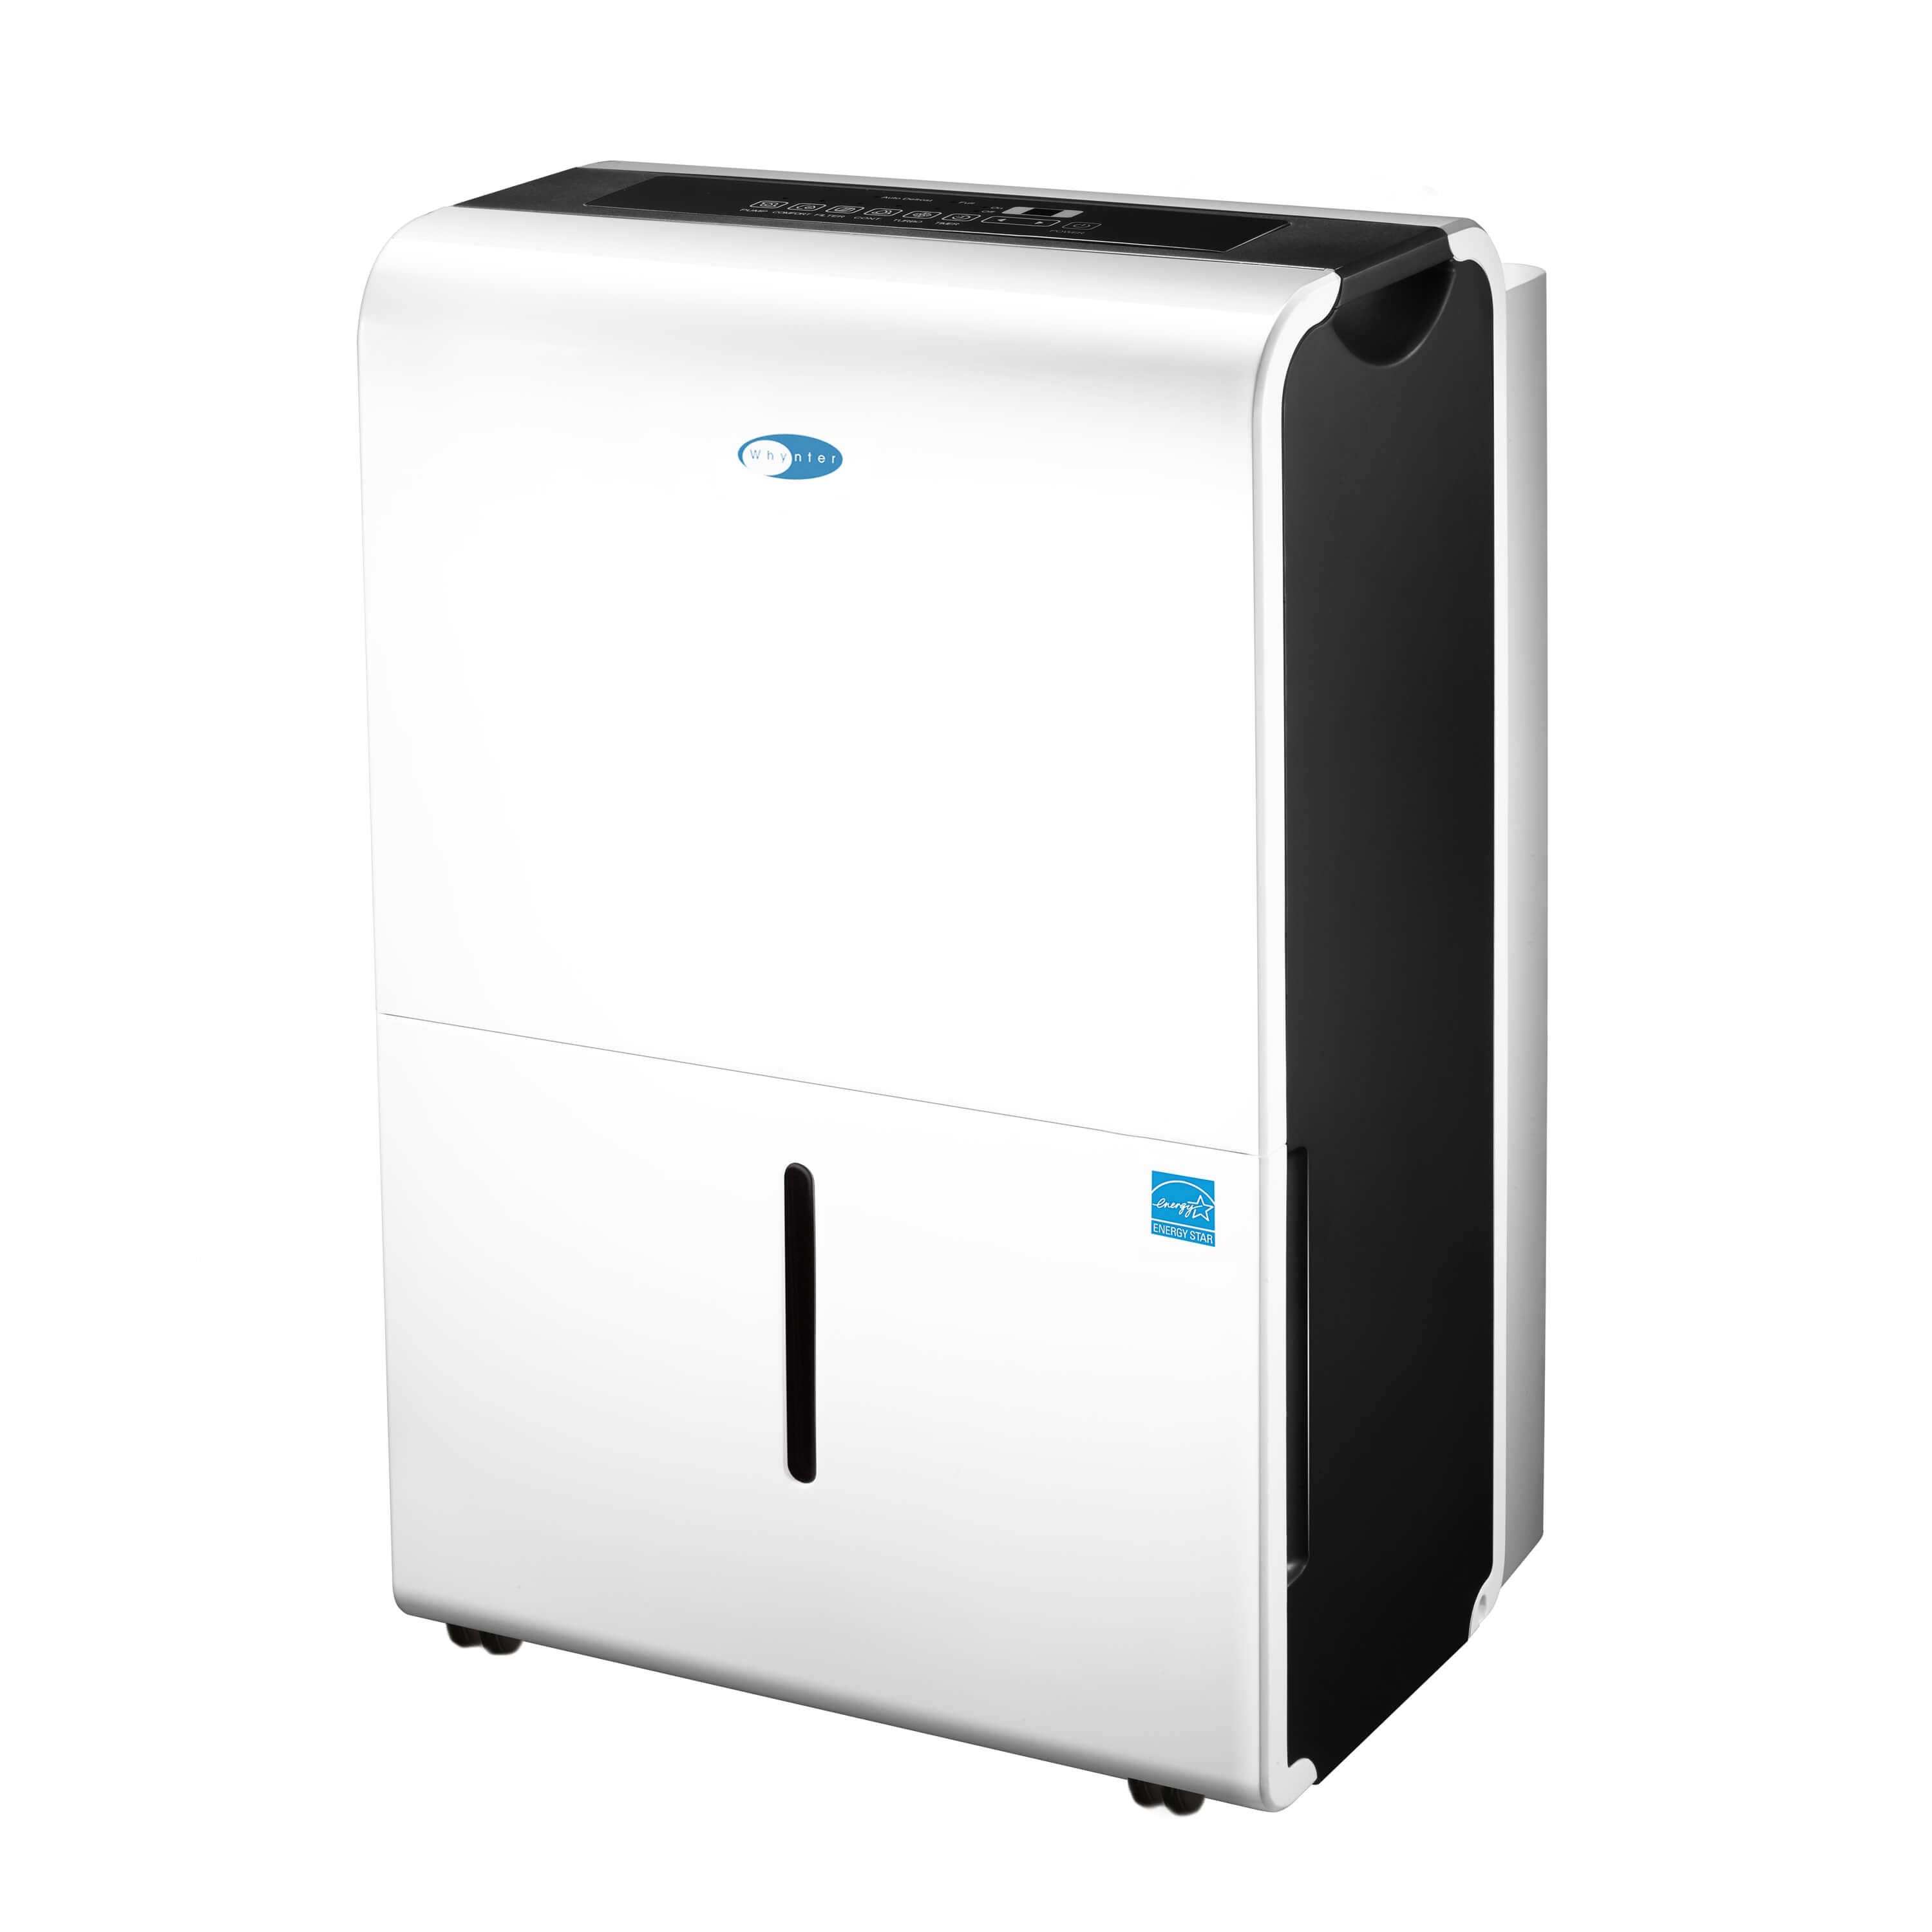 Whynter RPD-506EWP ENERGY STAR Most Efficient 2021 50 Pint High Capacity Portable Dehumidifier with Pump for up to 4000 sq ft